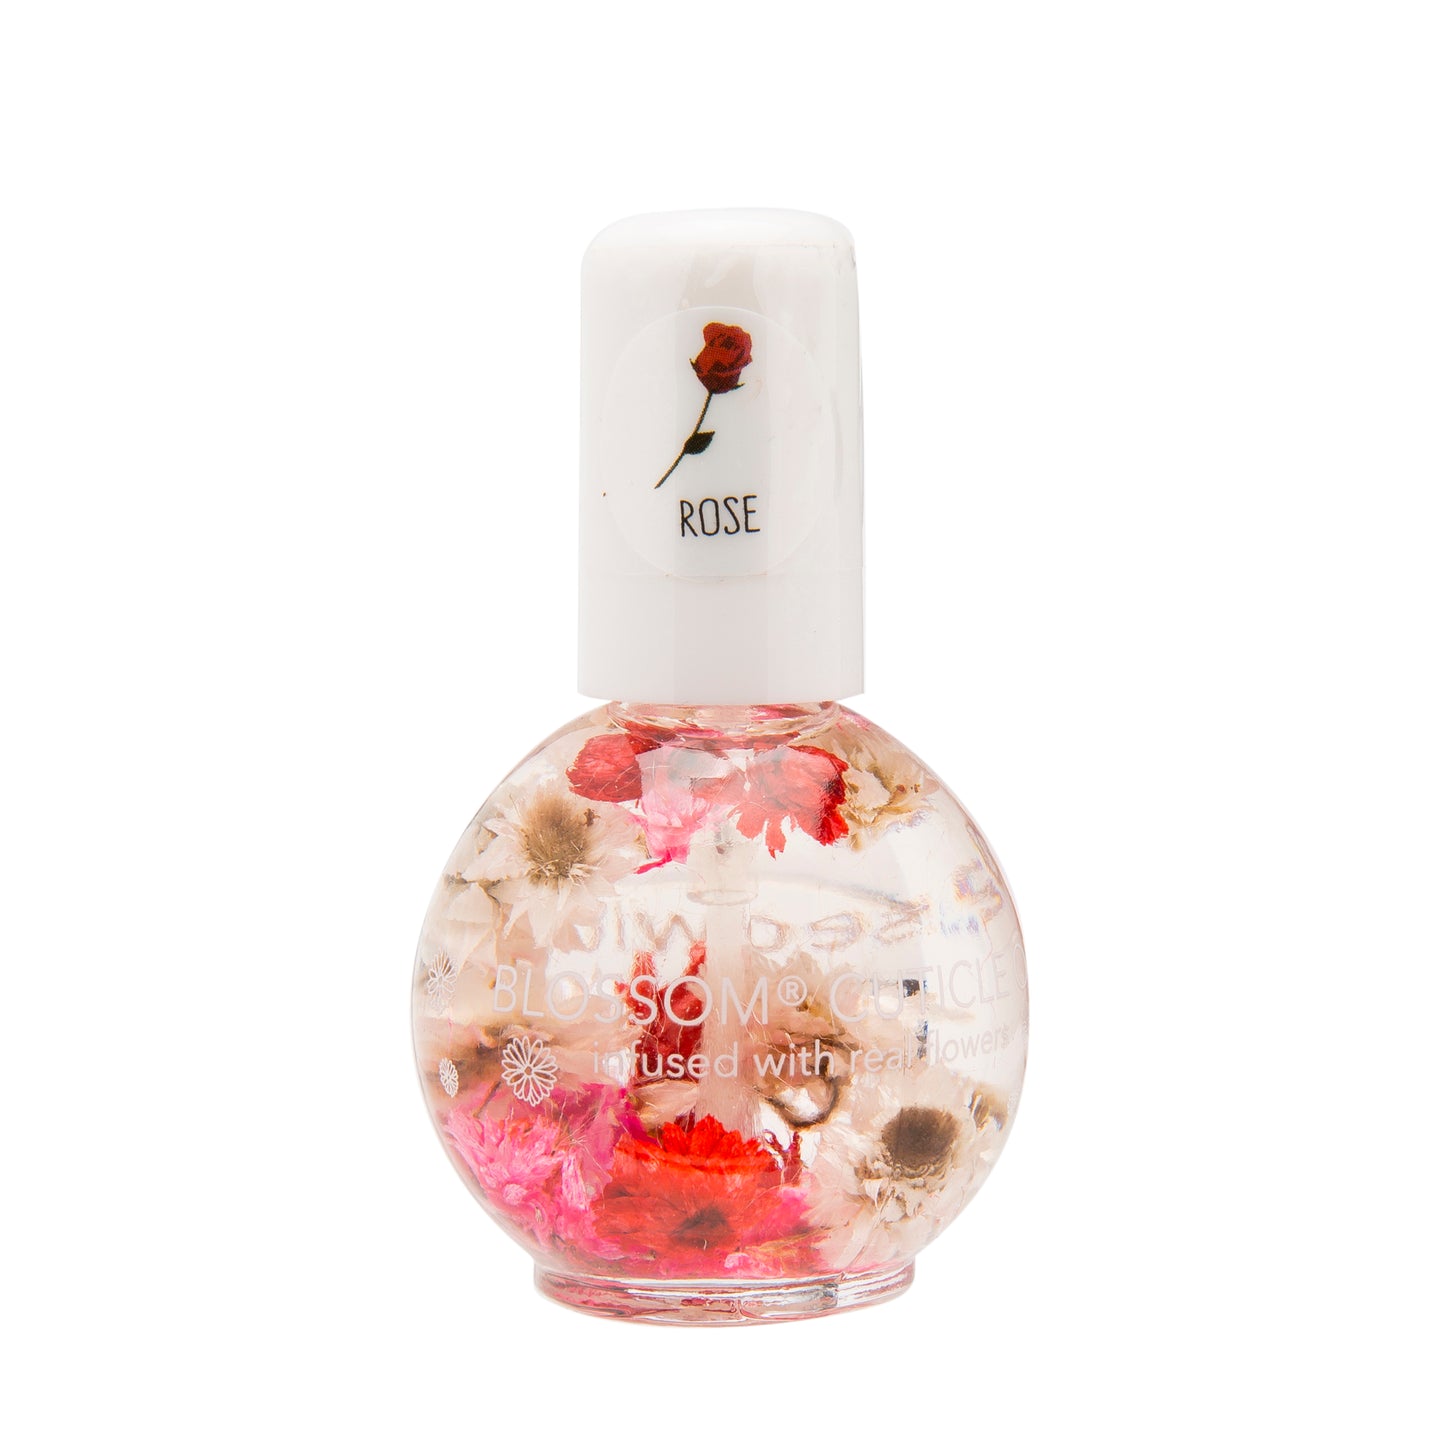 Blossom Cuticle Oil Scented Rose